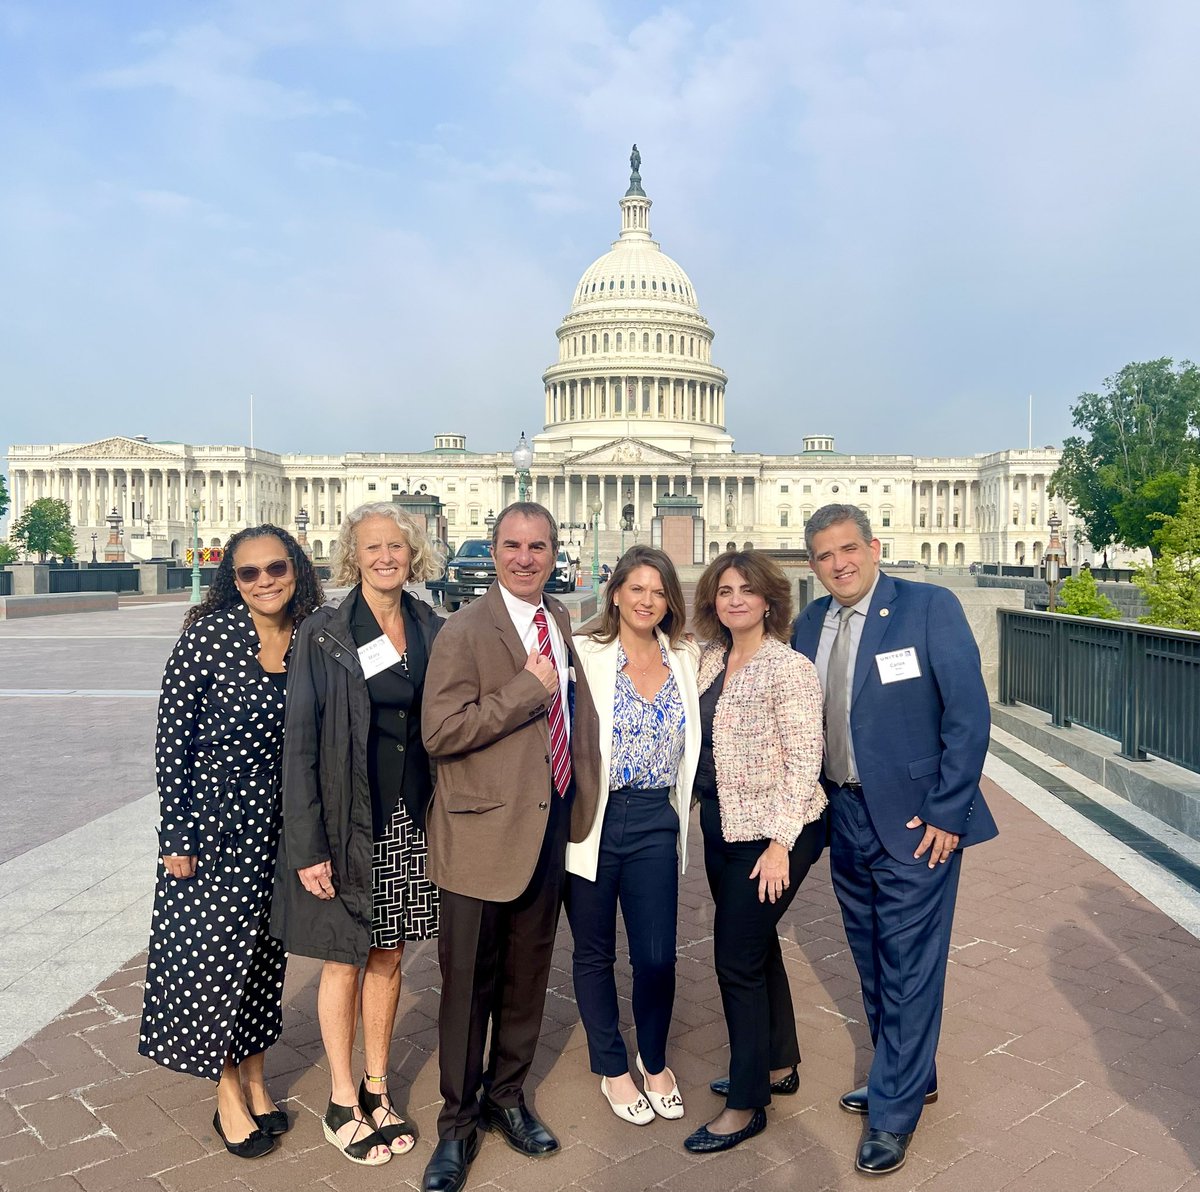 A very exciting and educational day on Capitol Hill! Sharing our experiences with policy makers to promote our priorities. 🇺🇸@rodney20148 @MikeHannaUAL @csarkari @Jordan_Bykowsky @Deeptime01 @Deeptime01